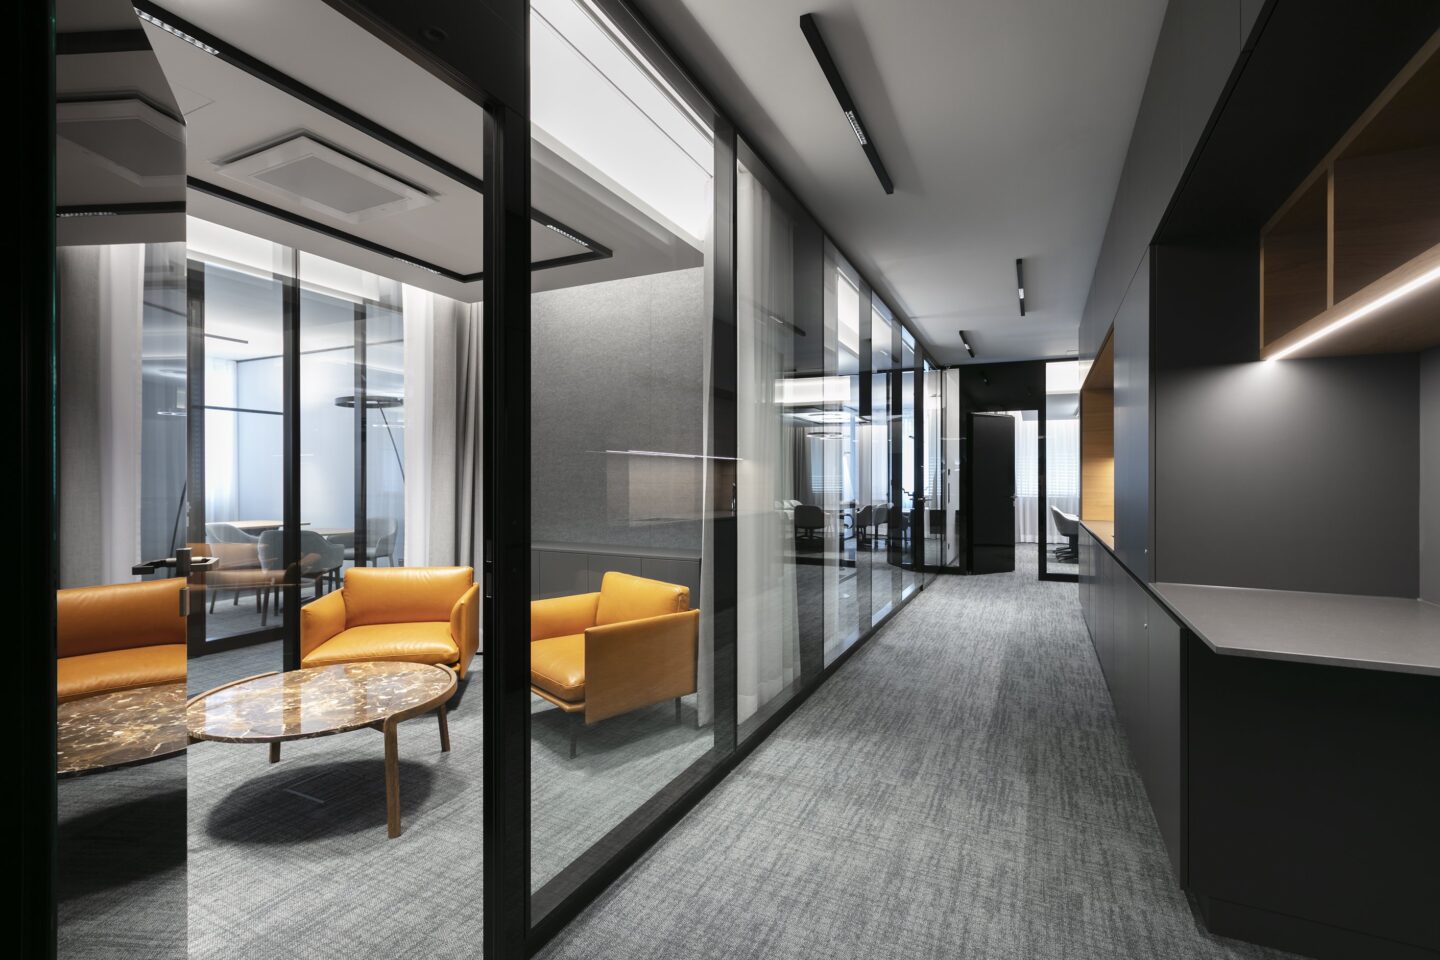 General Atlantic, Munich │ system walls from feco │ glass walls with black powder-coated profiles